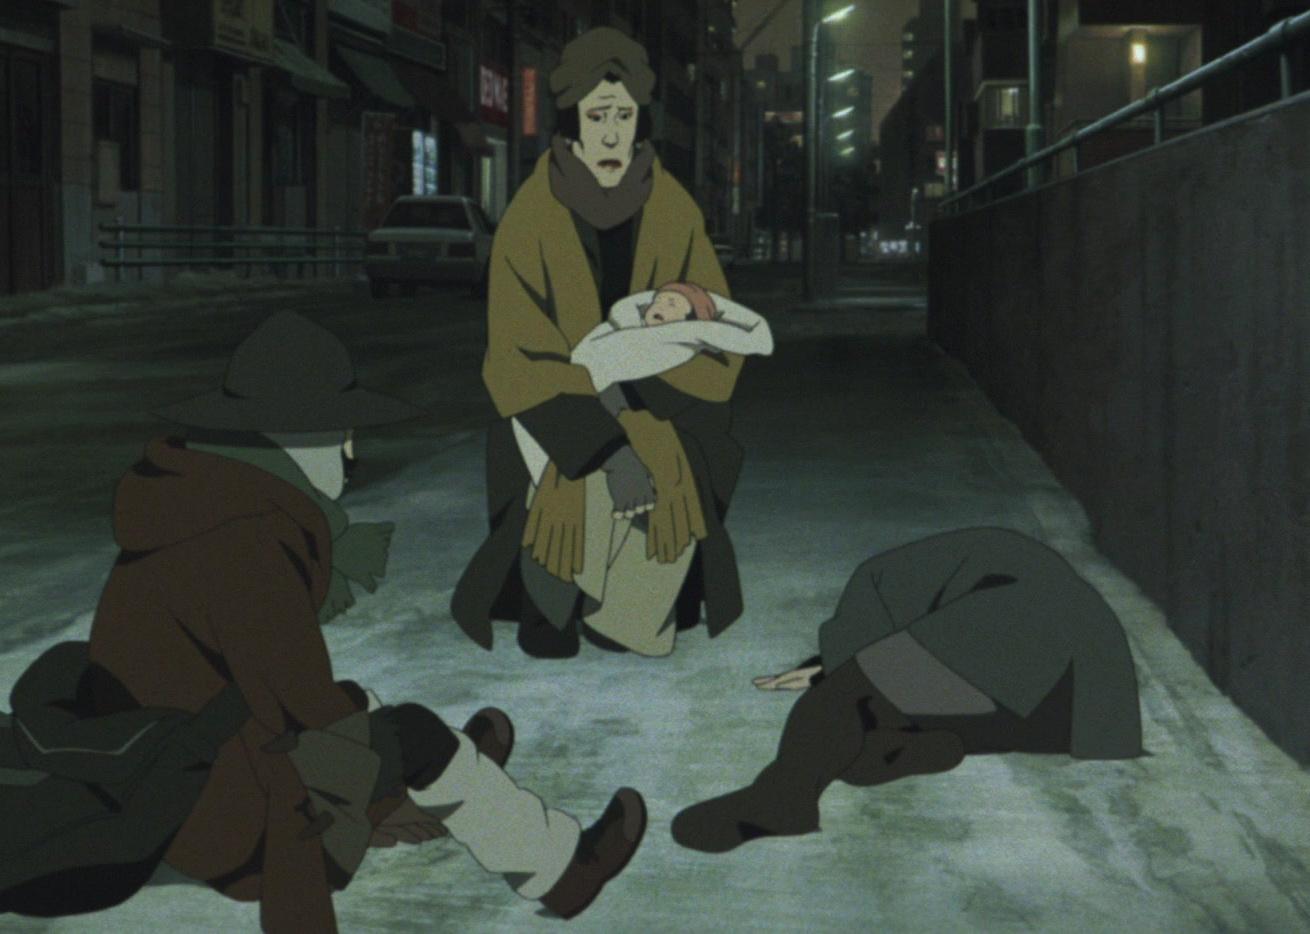 Three homeless people with a newborn baby.